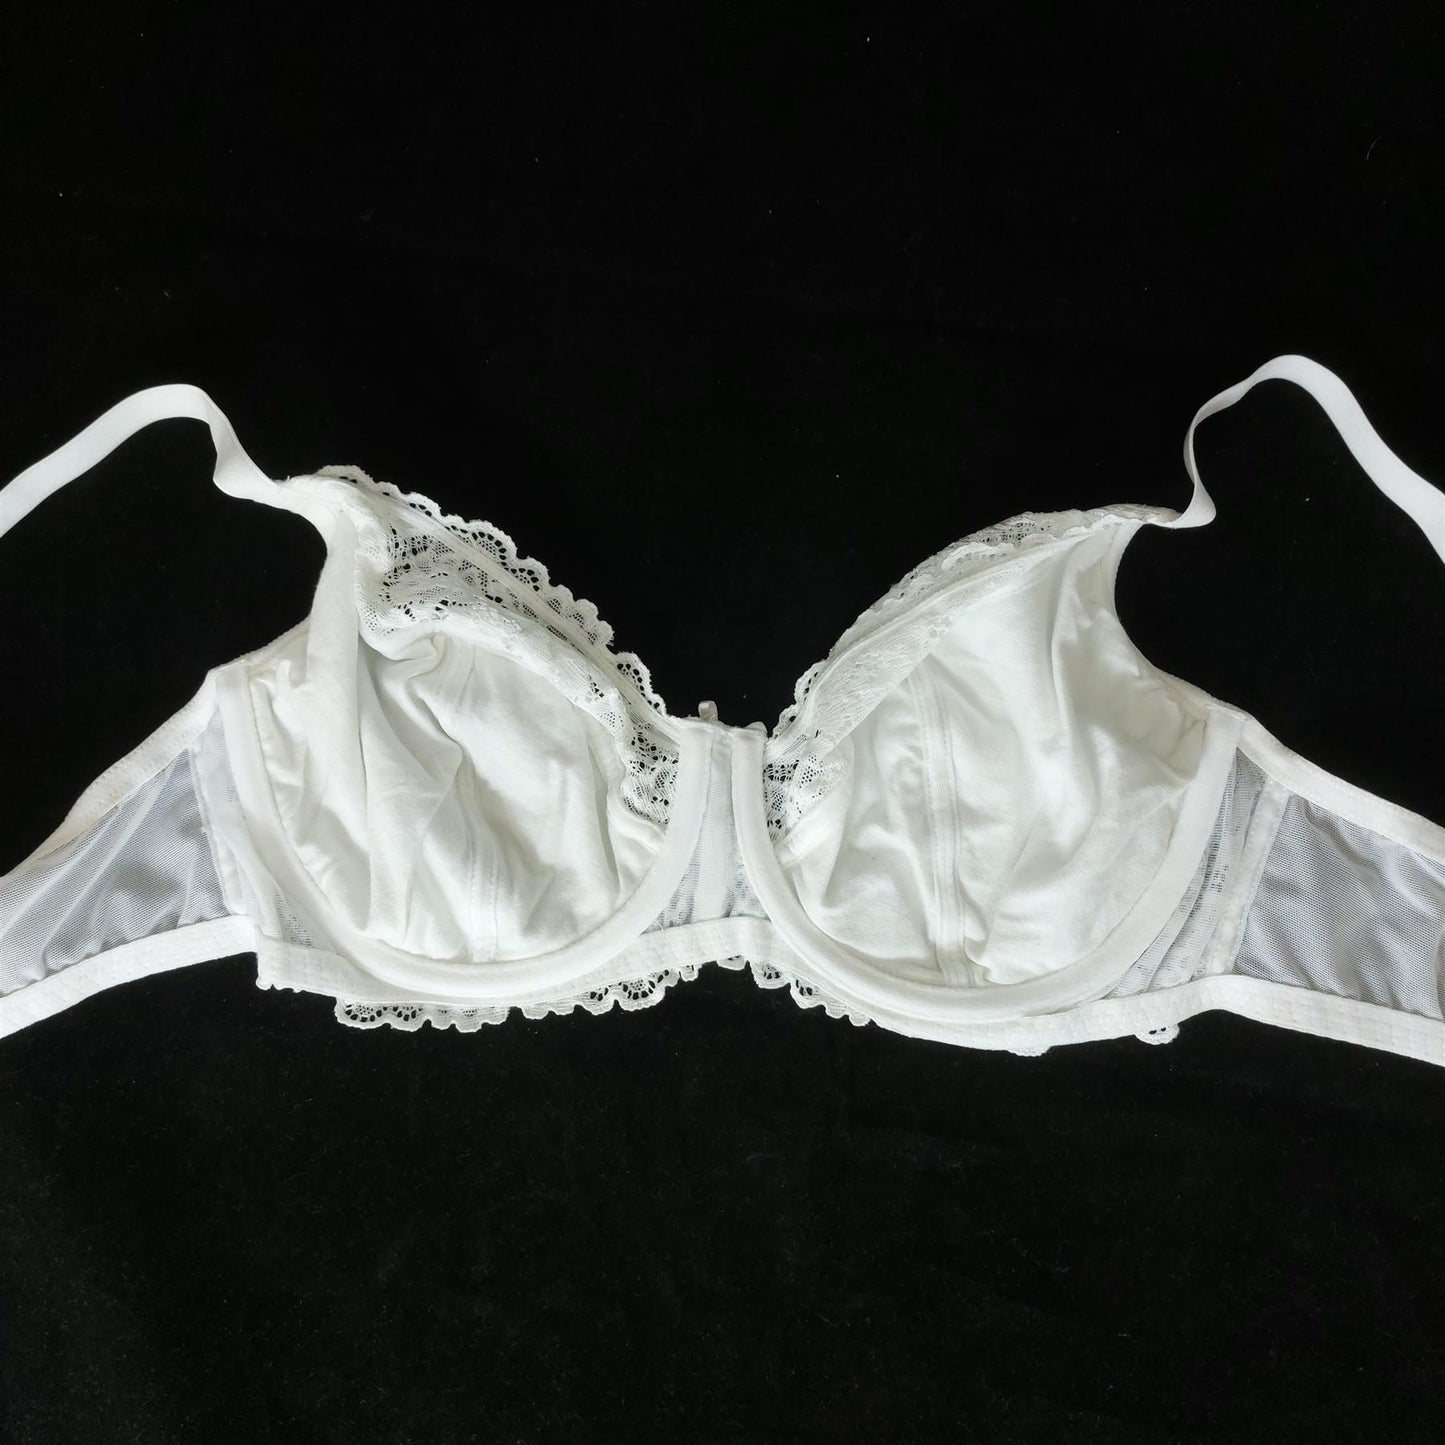 Women's White Lace Underwired Bra Unpadded Cotton Lined Comfort Shop Soiled 36C